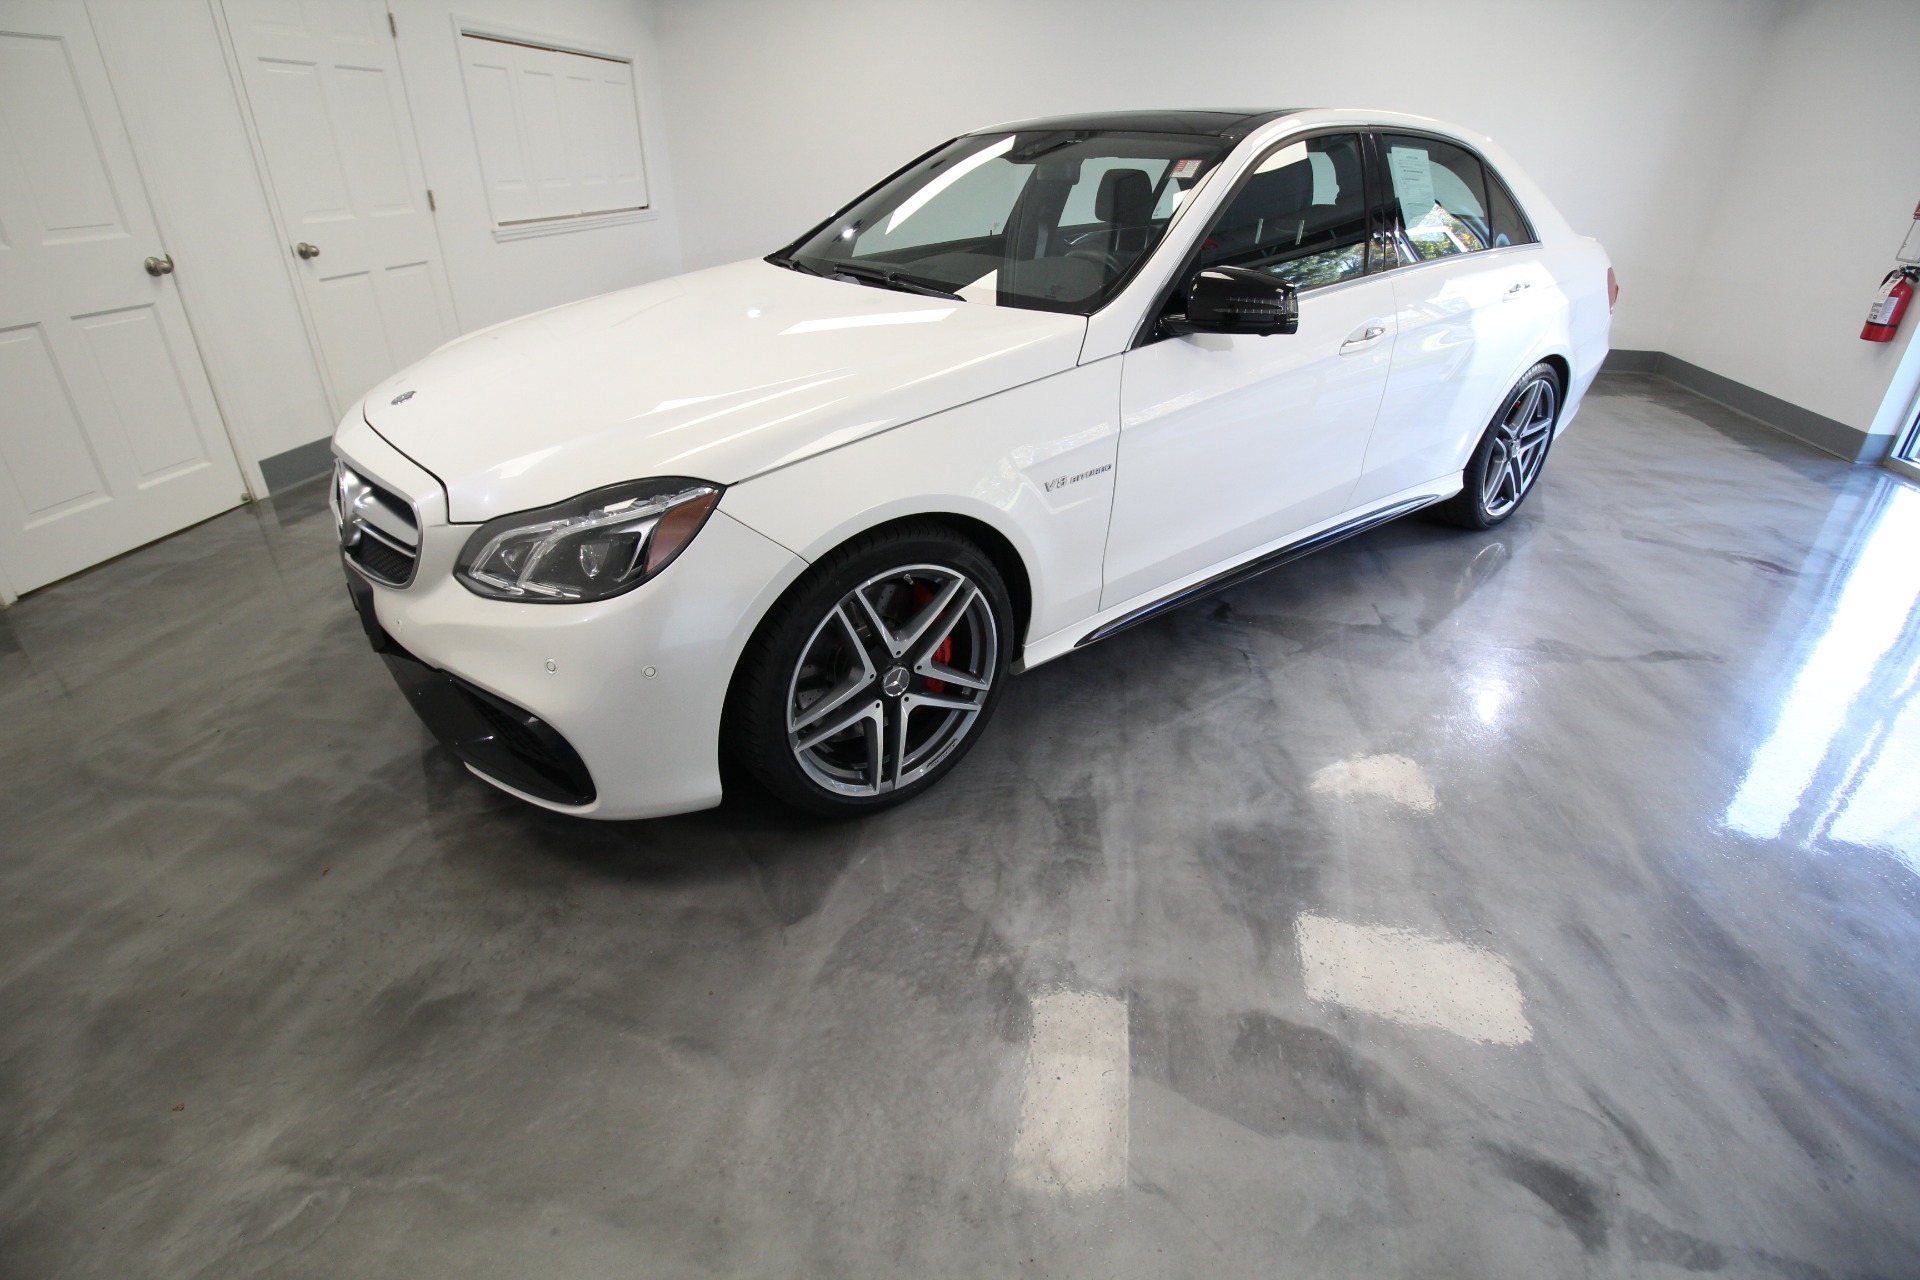 Used 2014 WHITE Mercedes-Benz E-Class E63 S E63S LOADED WITH OPTIONS SUPERB CONDITION RARE FIND | Albany, NY